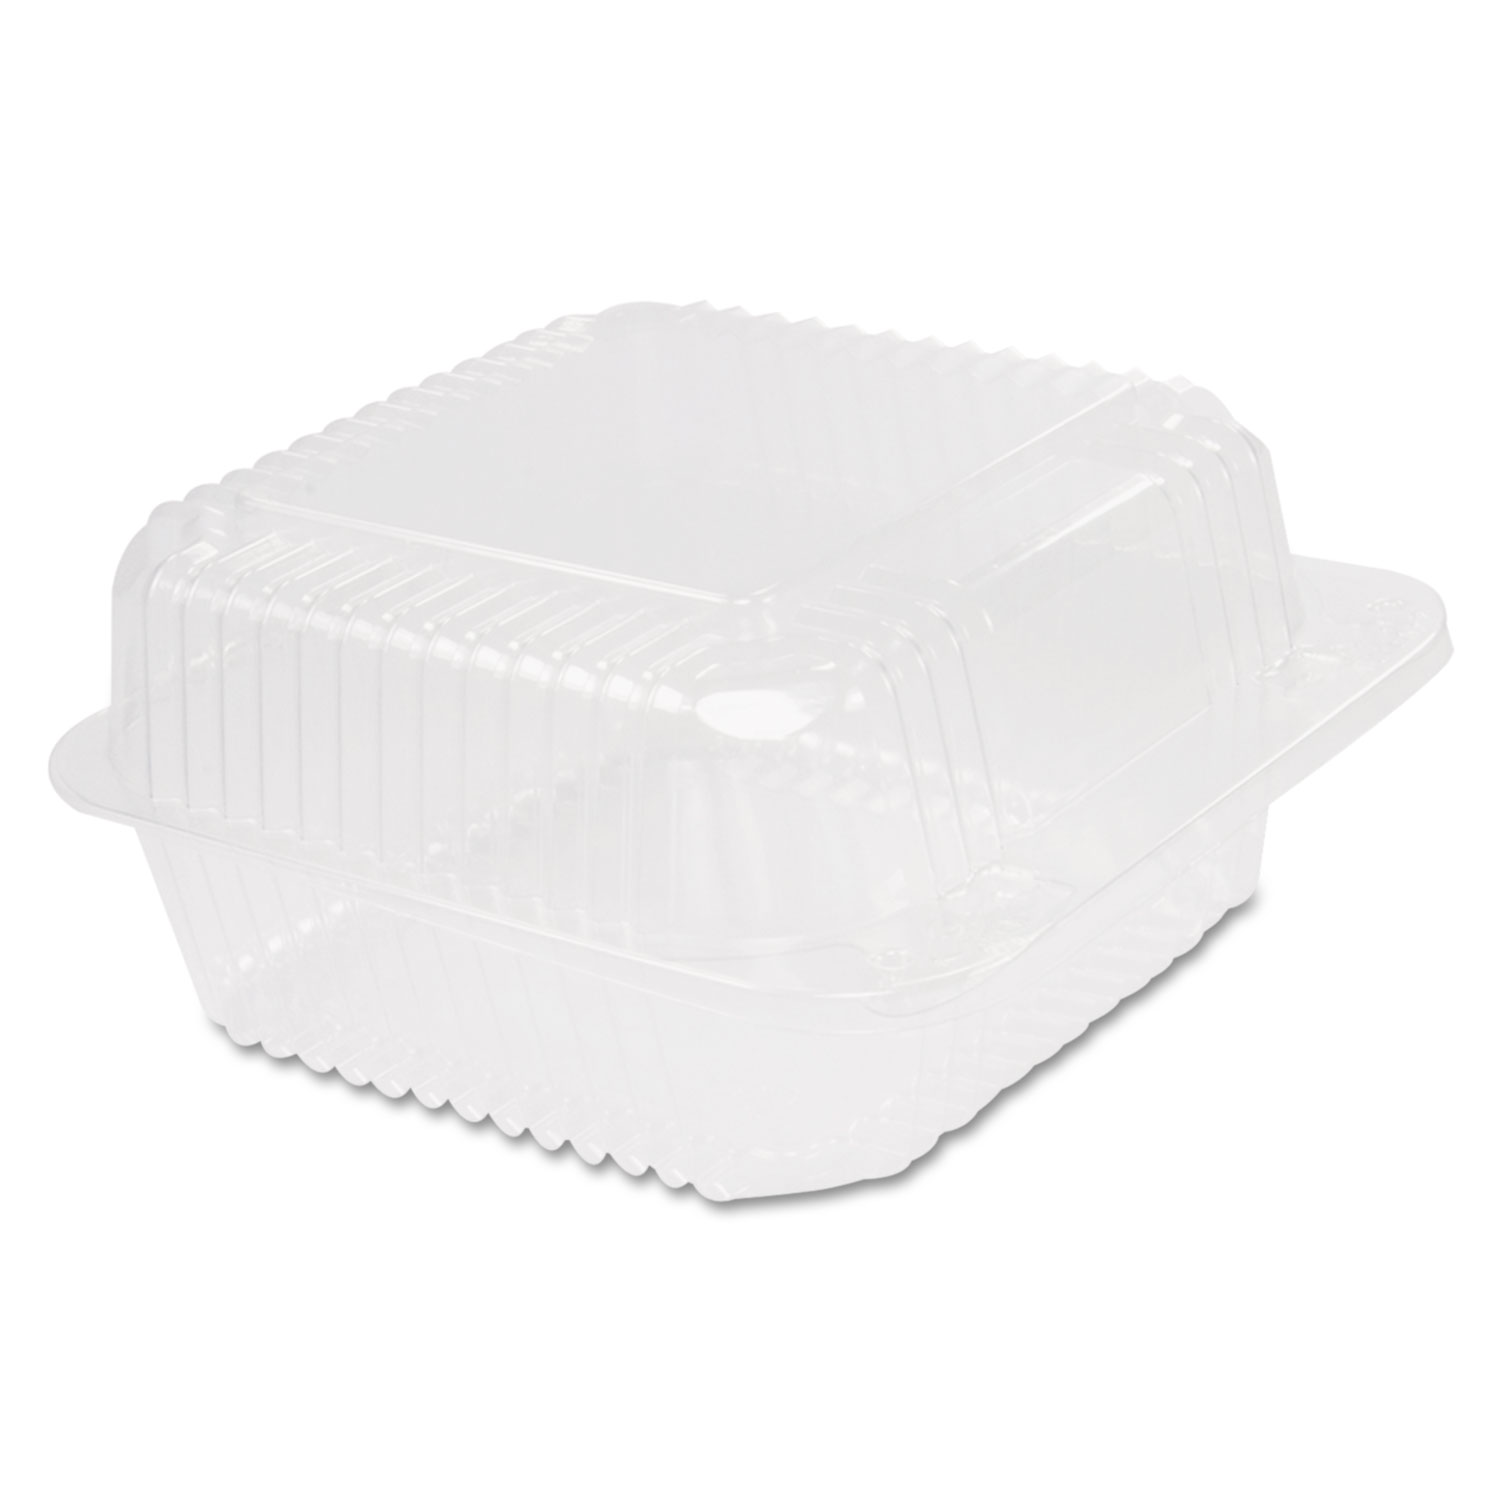  Dart C25UT1 Staylock Clear Hinged Container Square Deep Base, 6 1/10x6 1/2x3,125/PK 4 PK/CT (DCCC25UT1) 